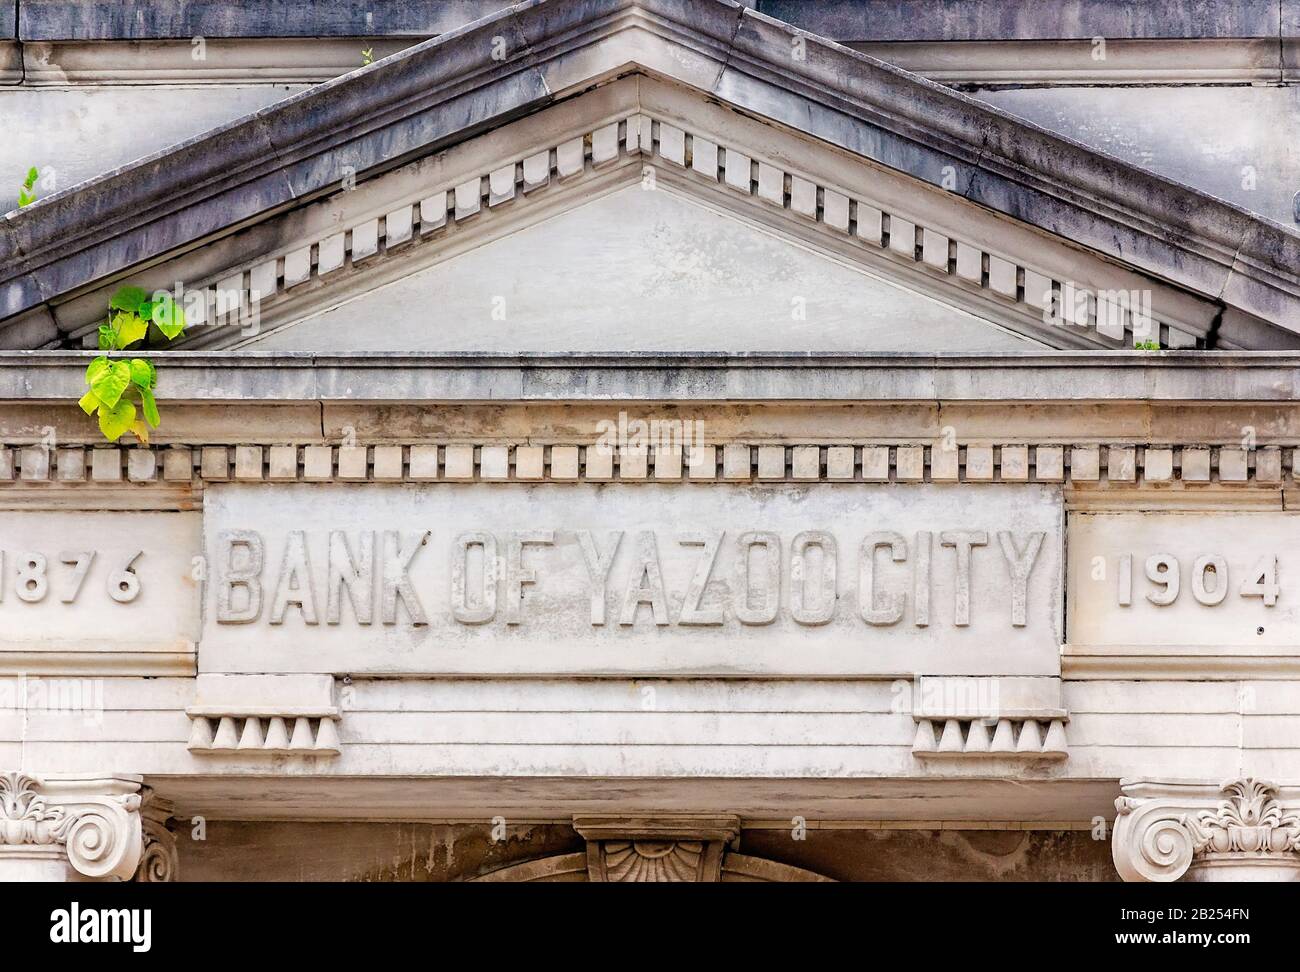 The Bank of Yazoo City is pictured, July 27, 2019, in Yazoo City, Mississippi. It is one of two historic banks in the city inspired by the Beaux-Arts. Stock Photo